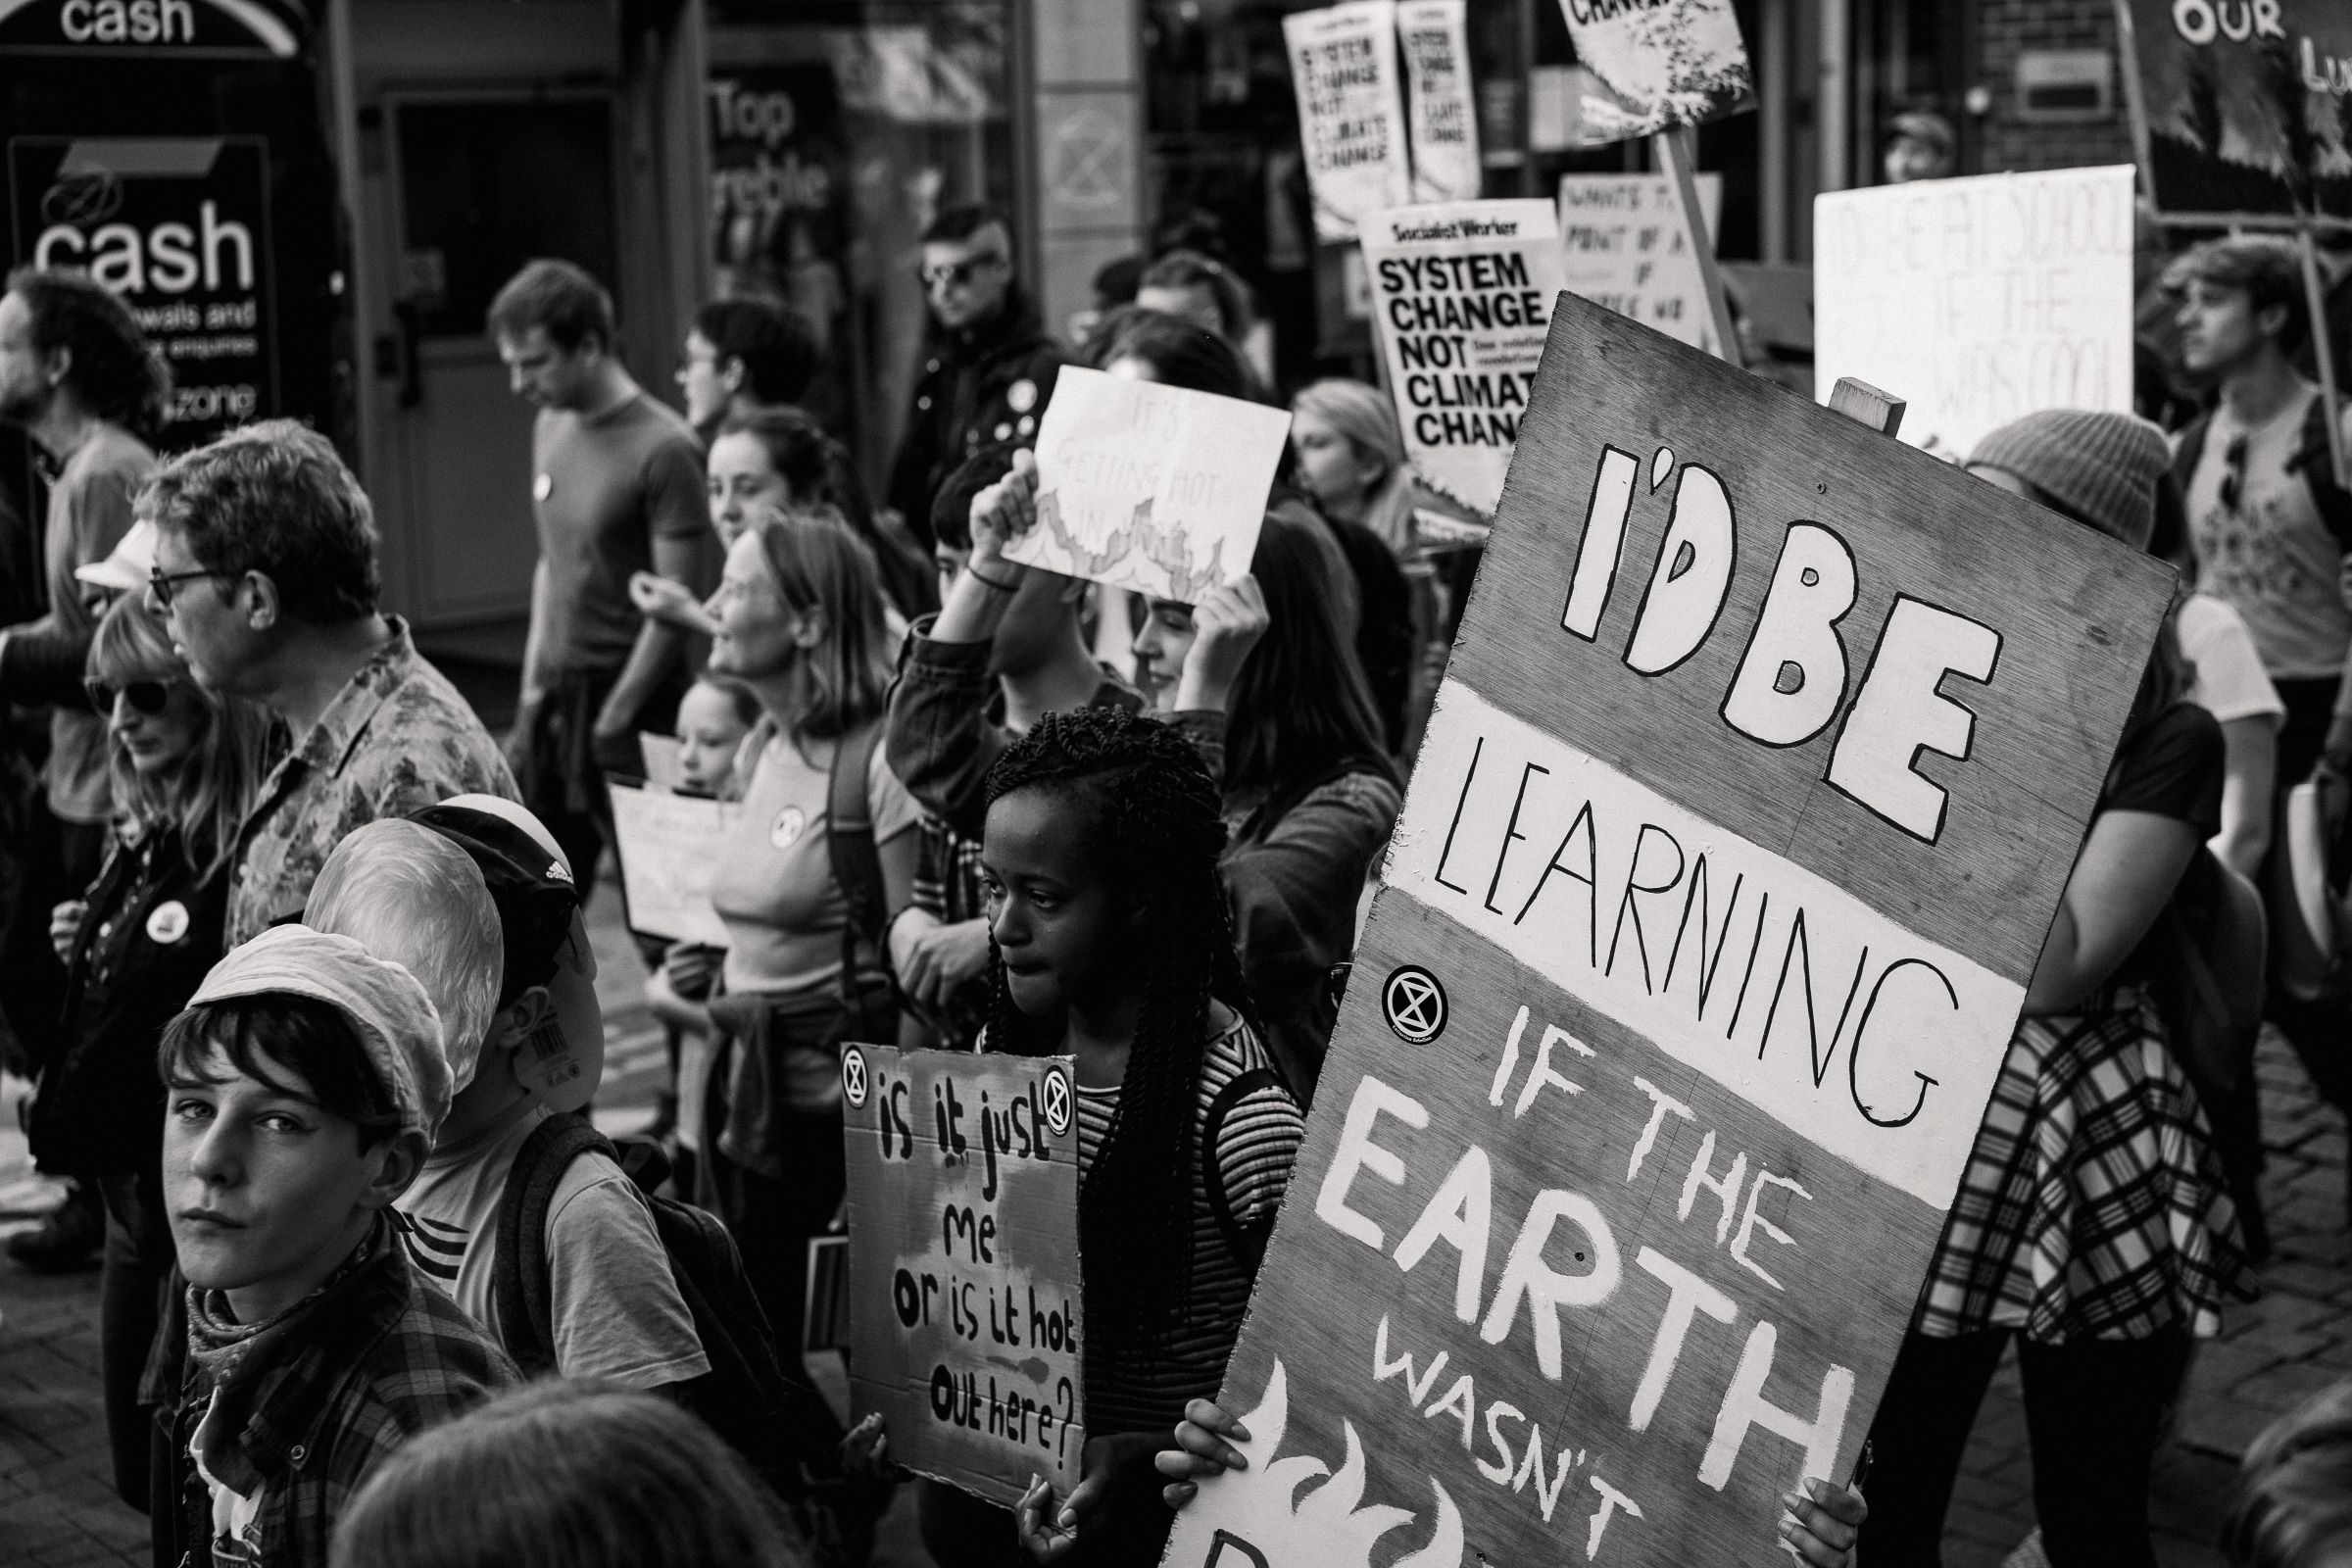 York St John students participating in a climate protest in York city centre.